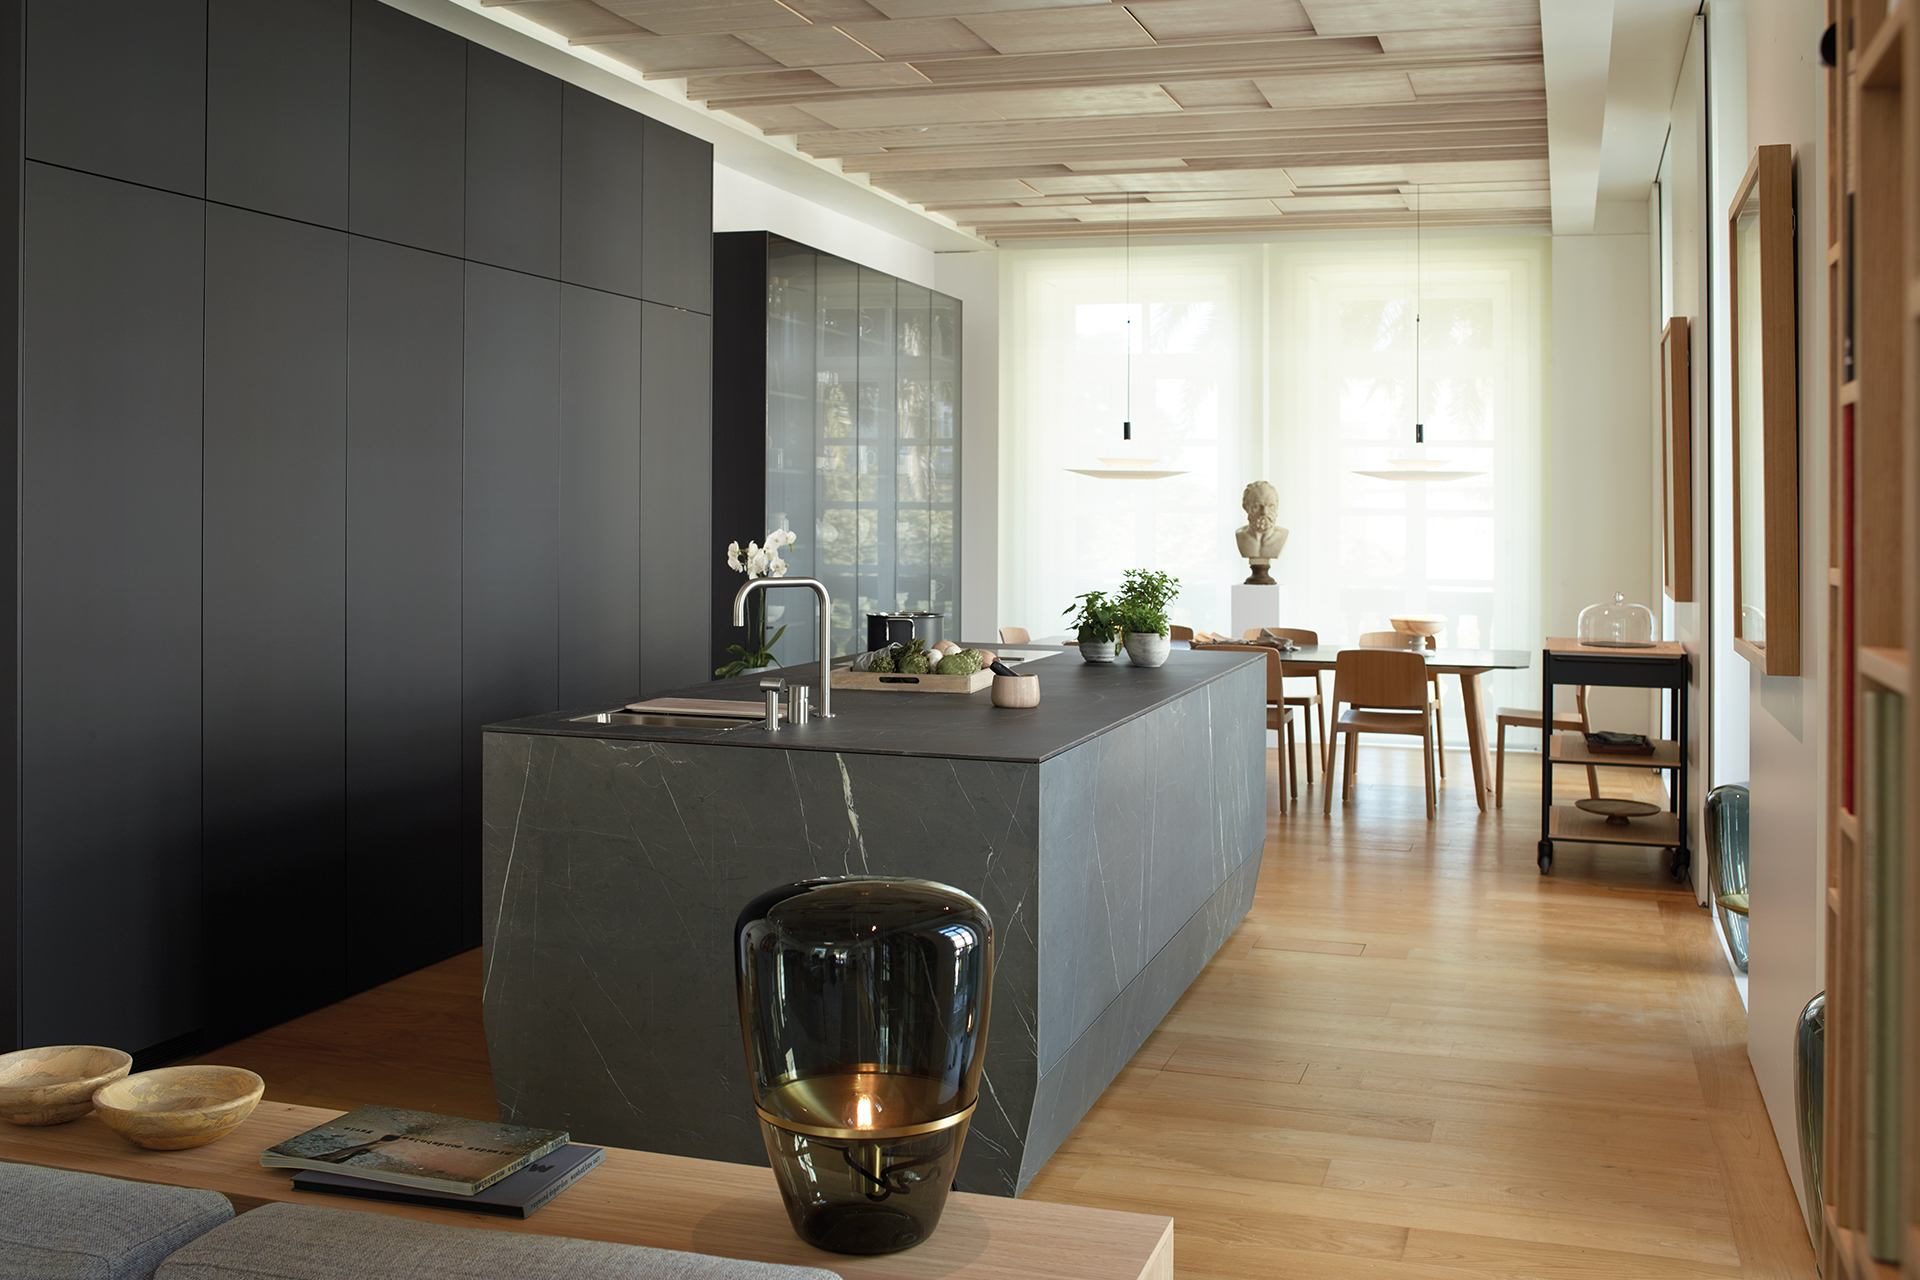  Photo of Kitchen with a linear design in black and dark grey, consisting of a central island, column units and a sideboard display cabinet